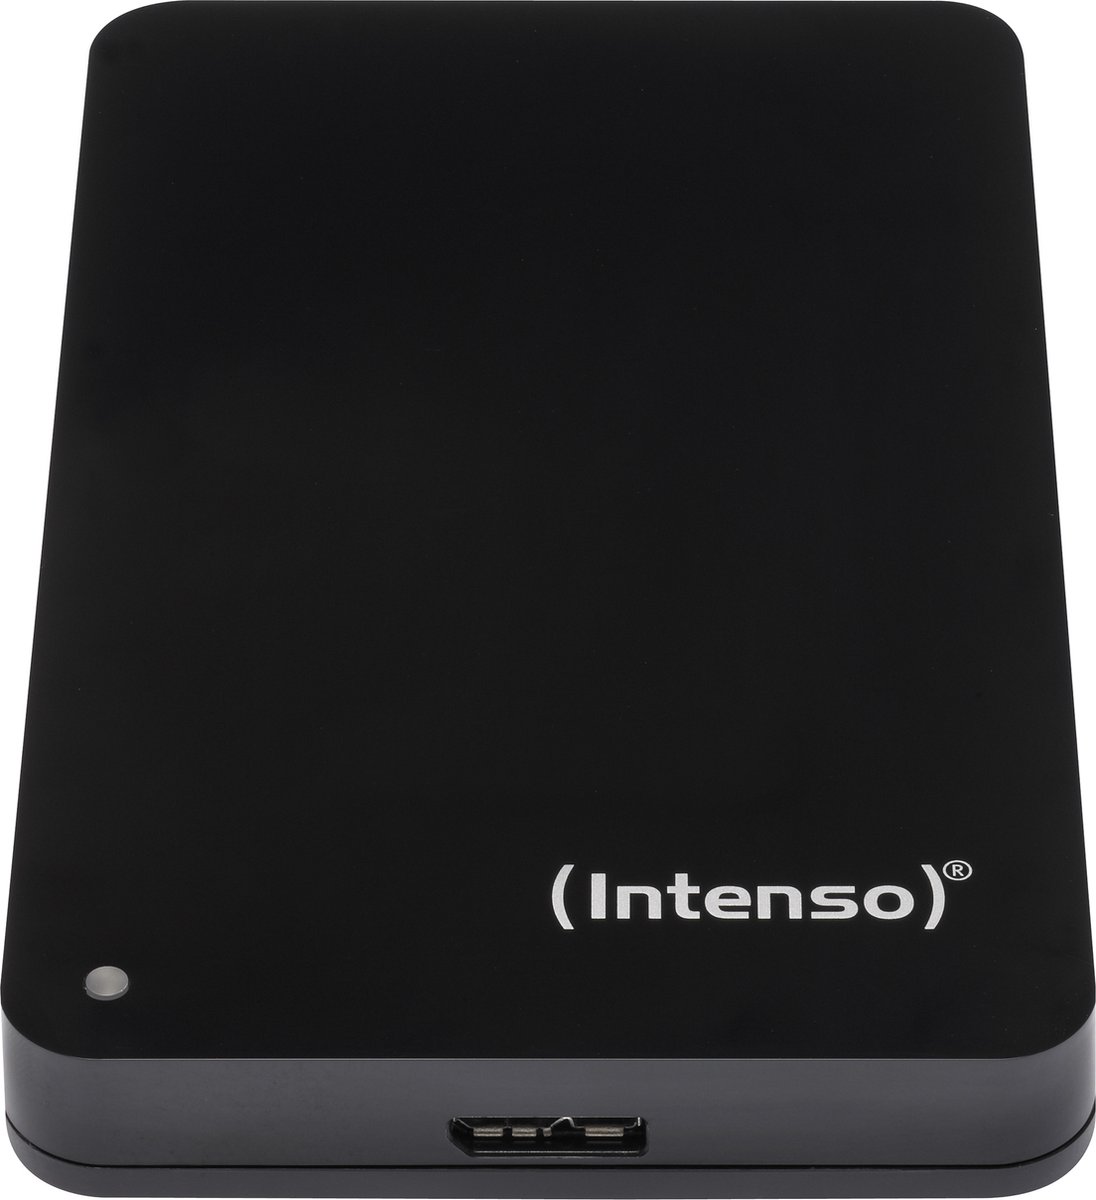 (Intenso) 2,5 inch Memory Case 500GB - Portable HDD - 500GB - USB 3.2 Super Speed